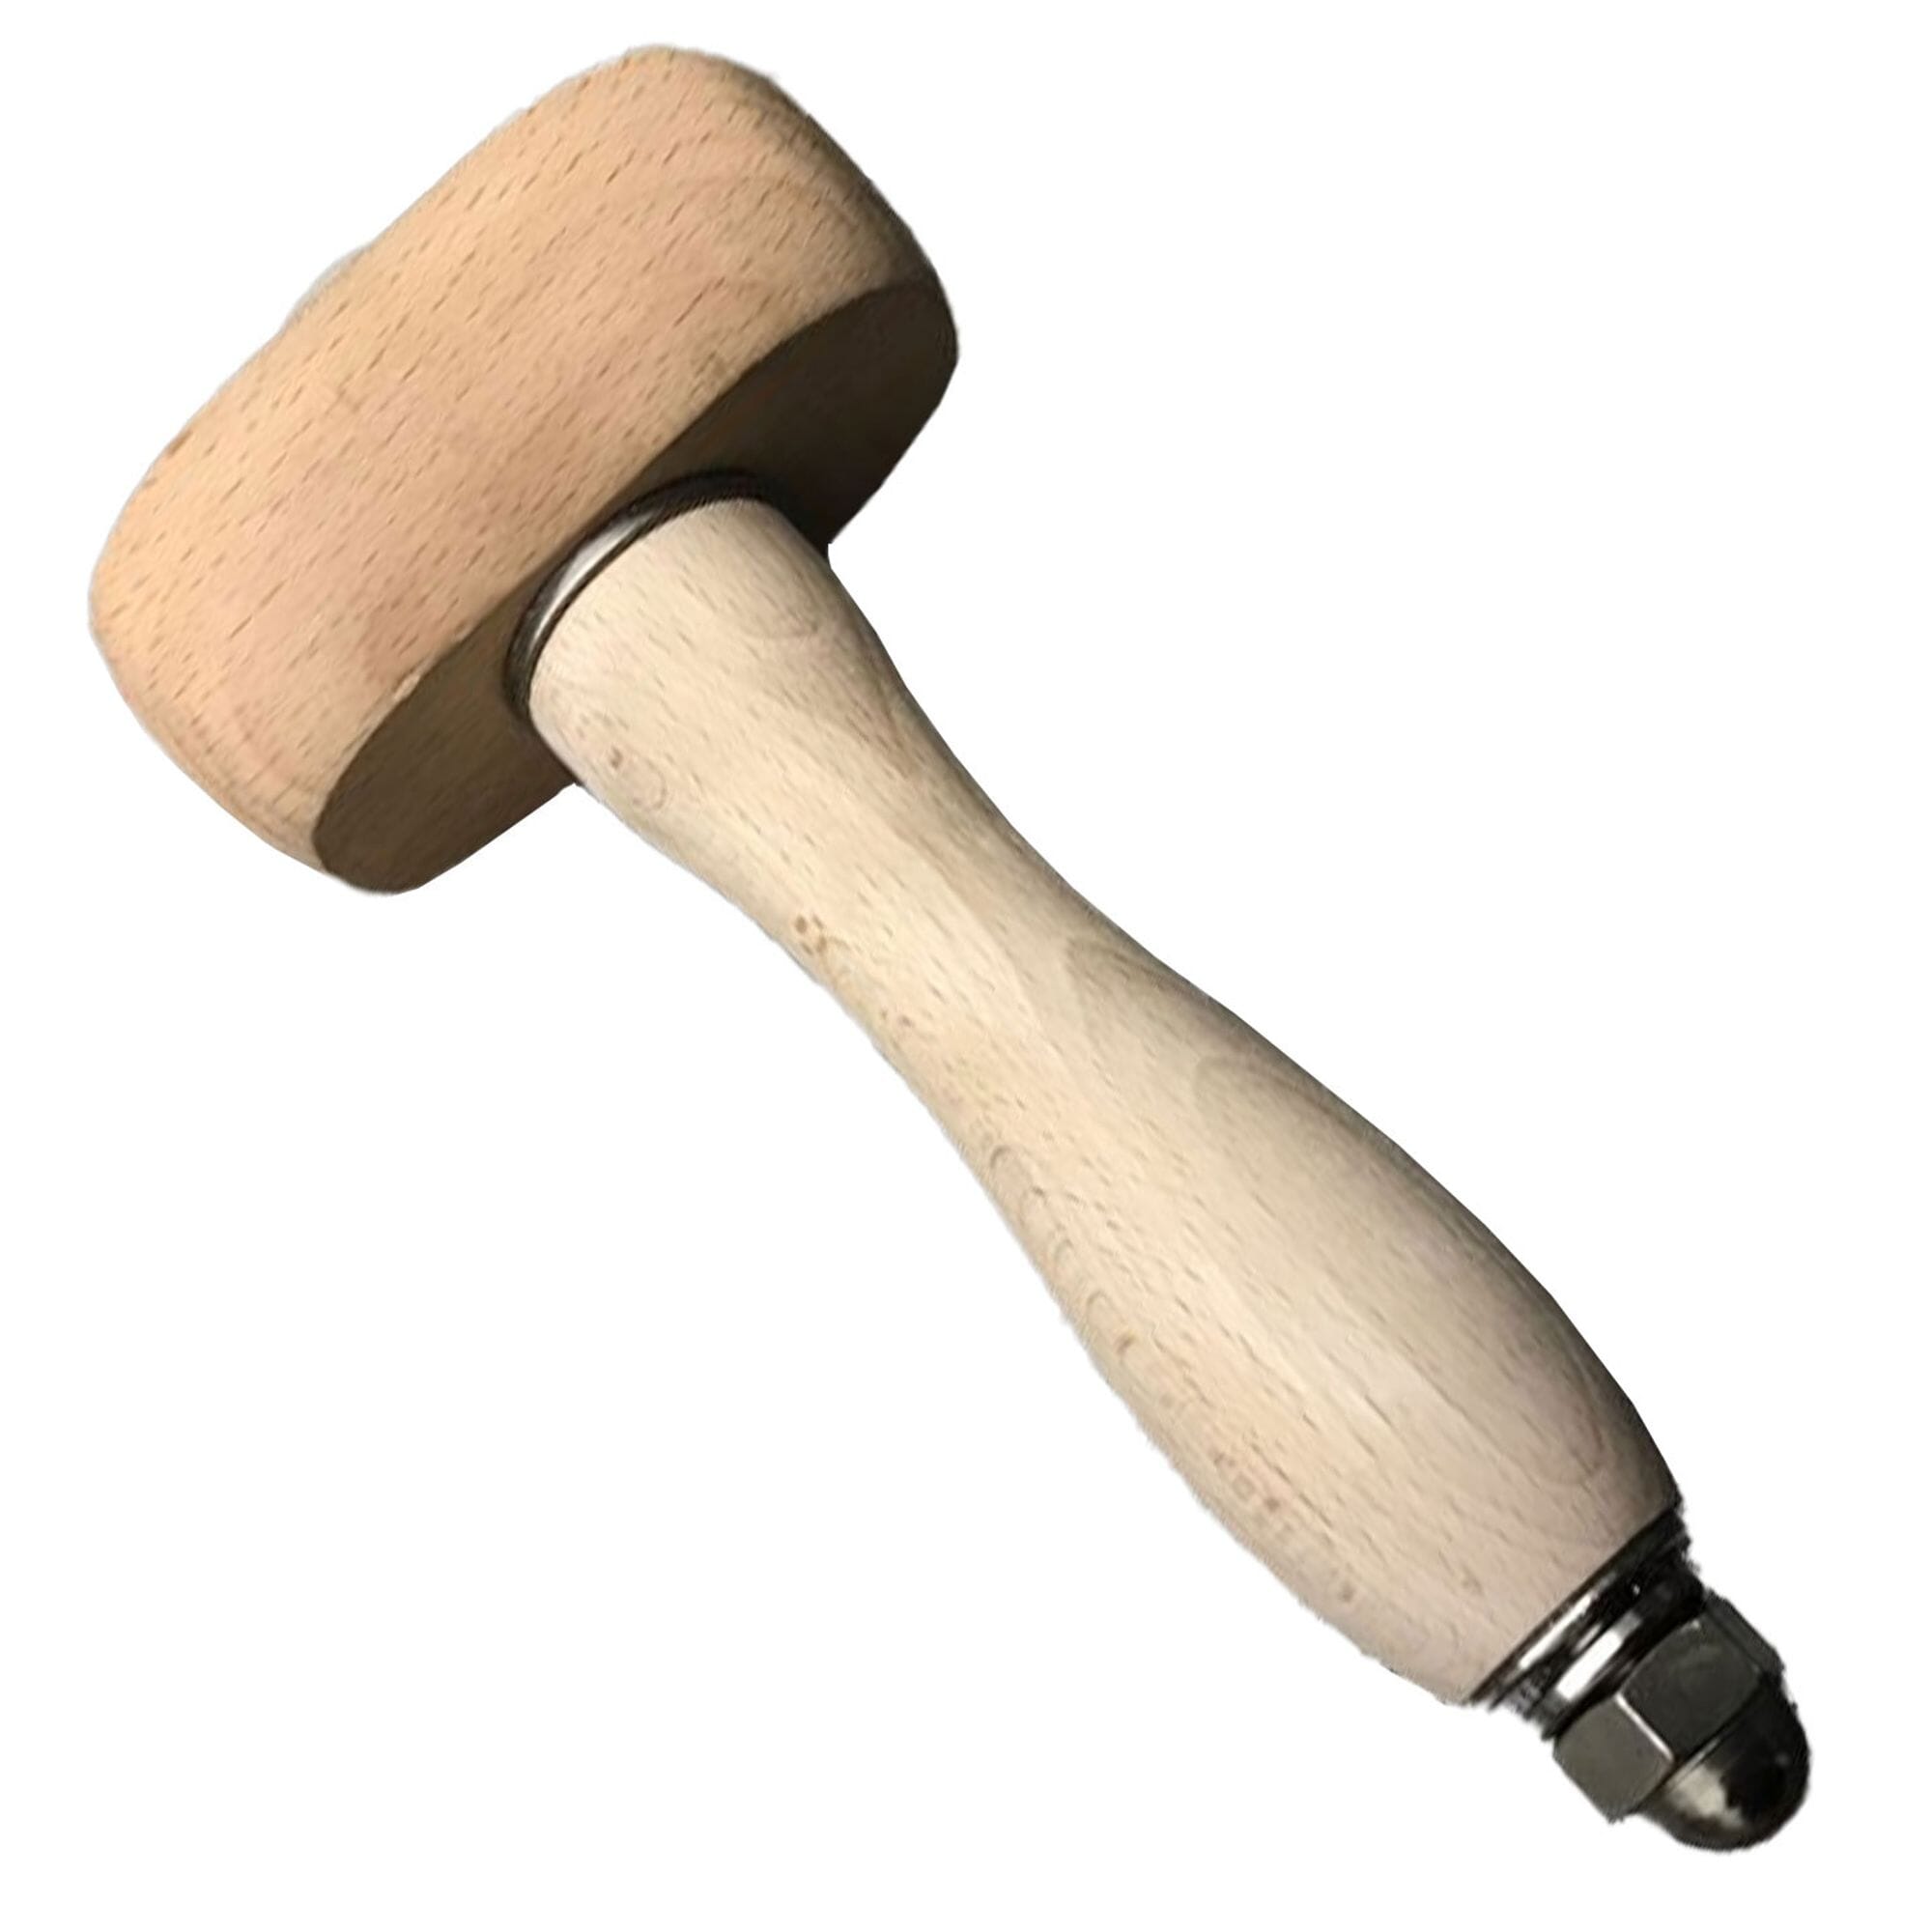 Wood Mallet Hammer Leather craft Punch Hammer Leather Craft Carving  Woodworking Tool